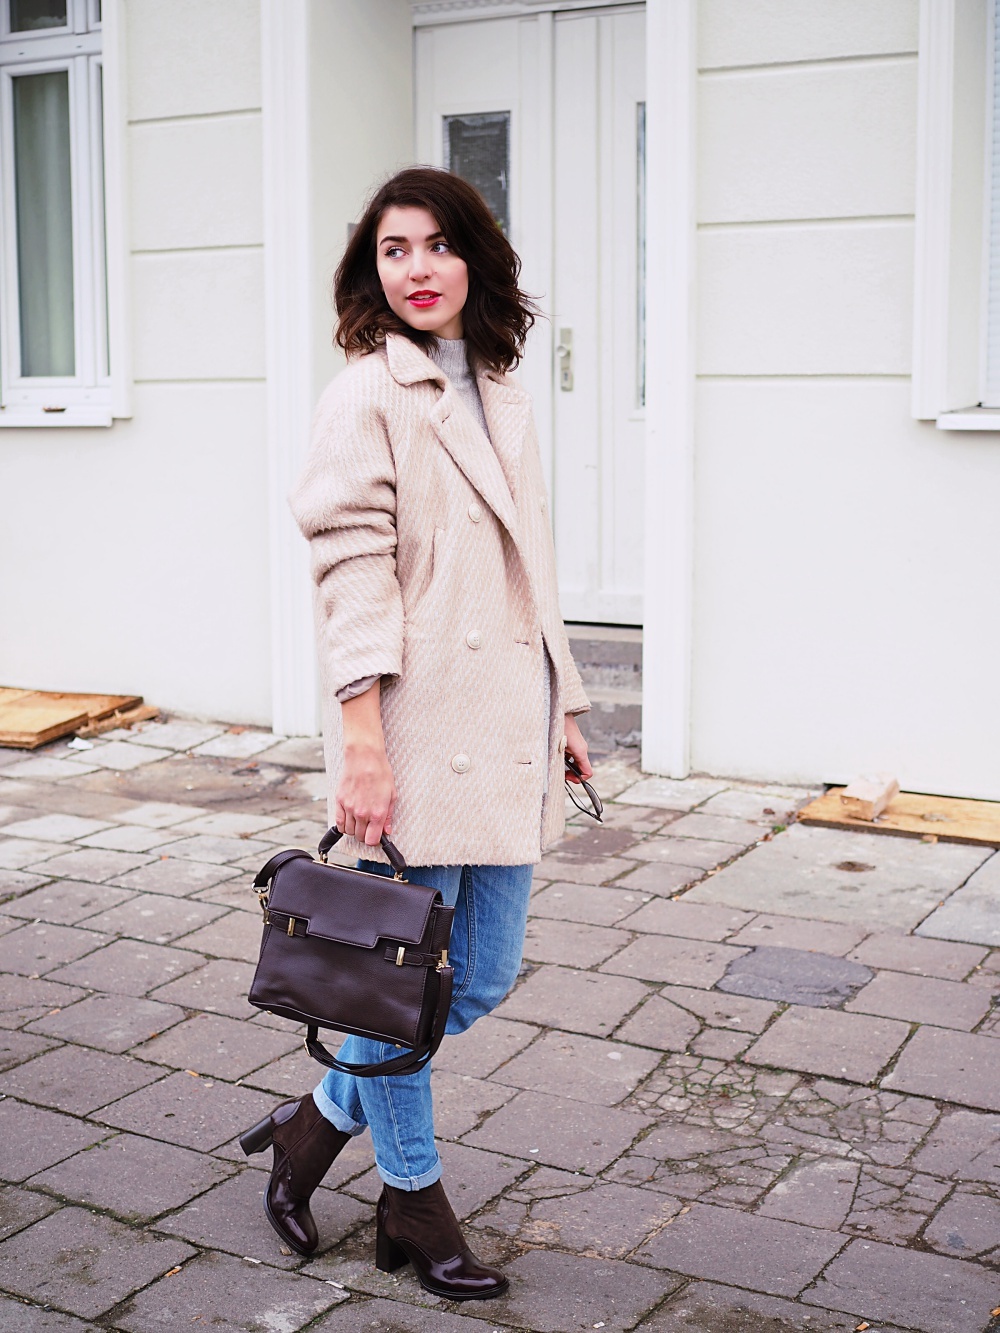 winter look blush brown neutrals streetstyle berlin samieze blog boyfriend jeans suede boots ray ban erika sunglasses asos coat oversize turtleneck sweater knitted h&m peperosa style trend how to wear 6